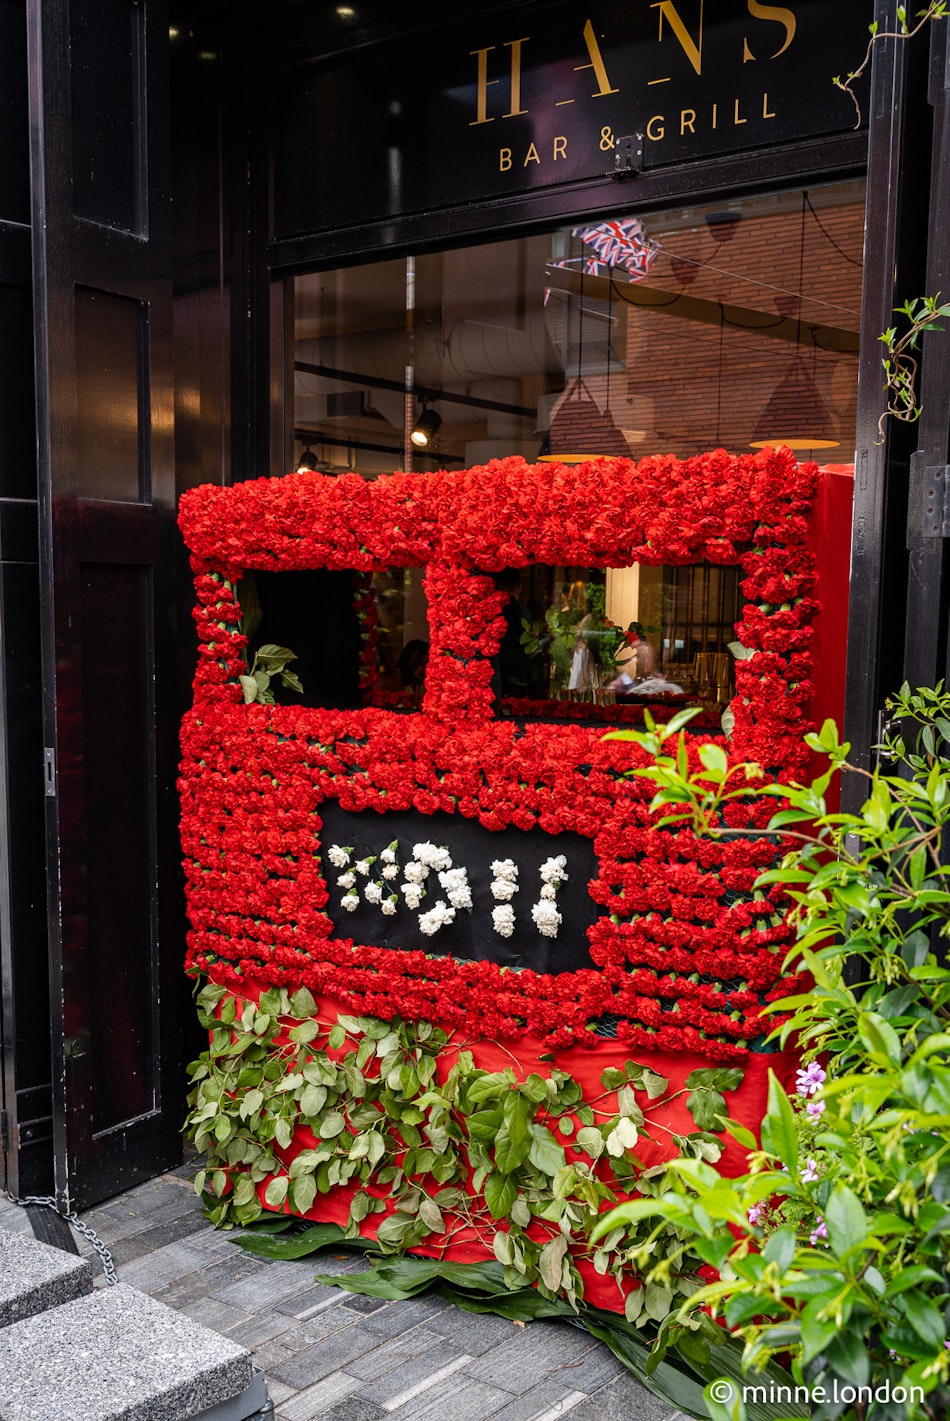 Hans' Bar and Grill London Bus floral display